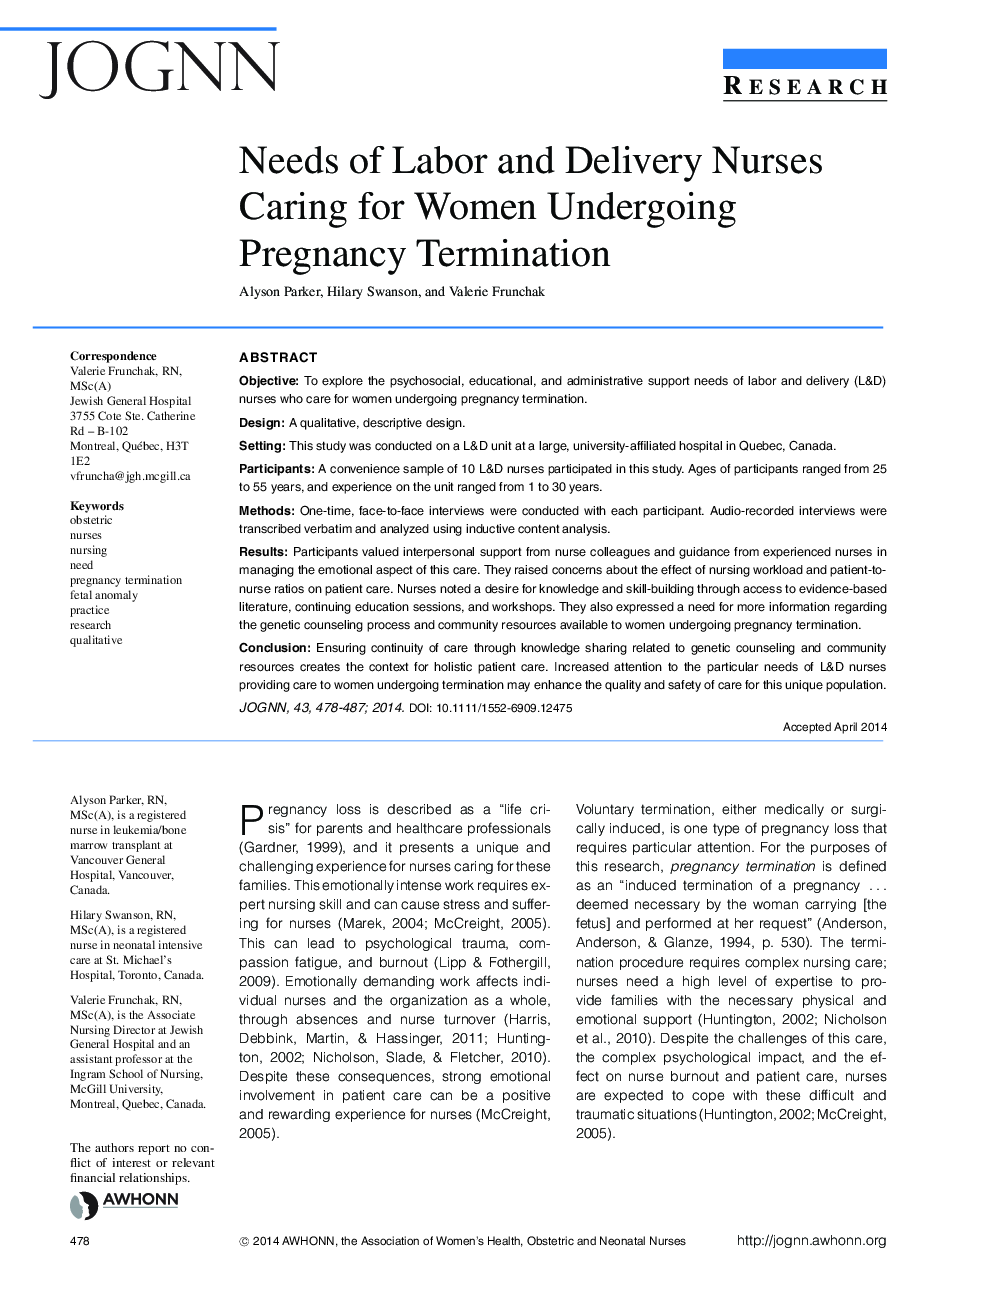 Needs of Labor and Delivery Nurses Caring for Women Undergoing Pregnancy Termination